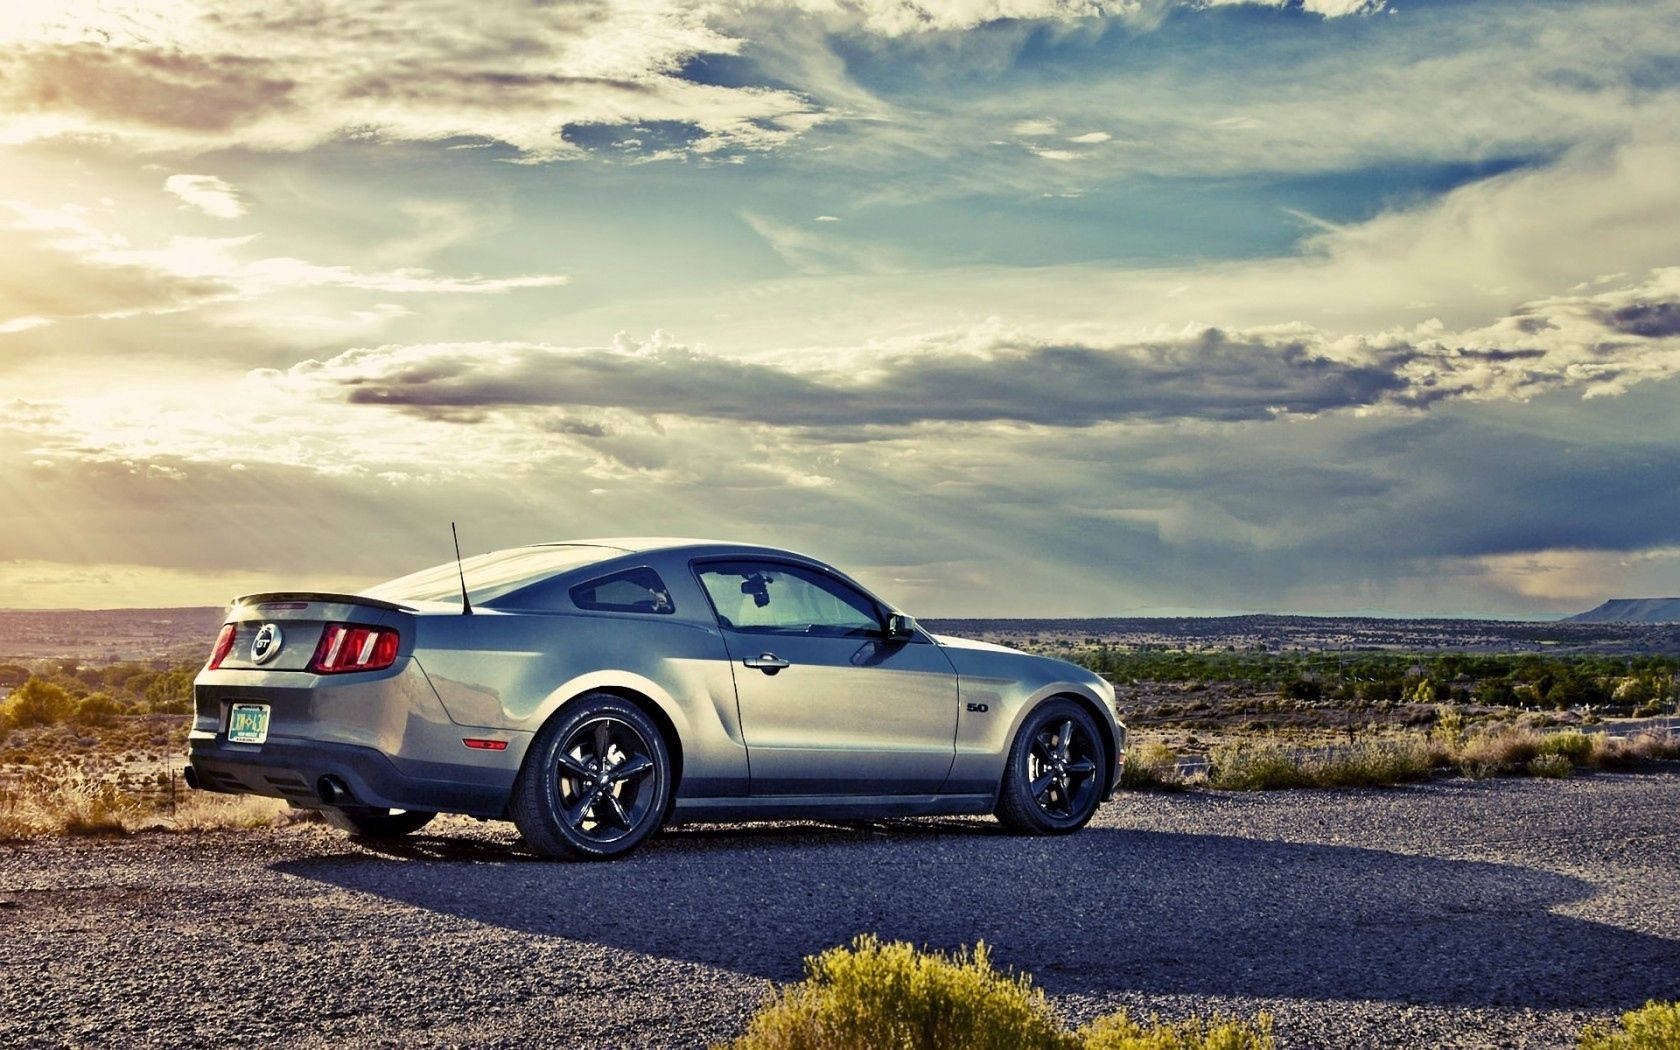 1680X1050 Mustang Wallpaper and Background